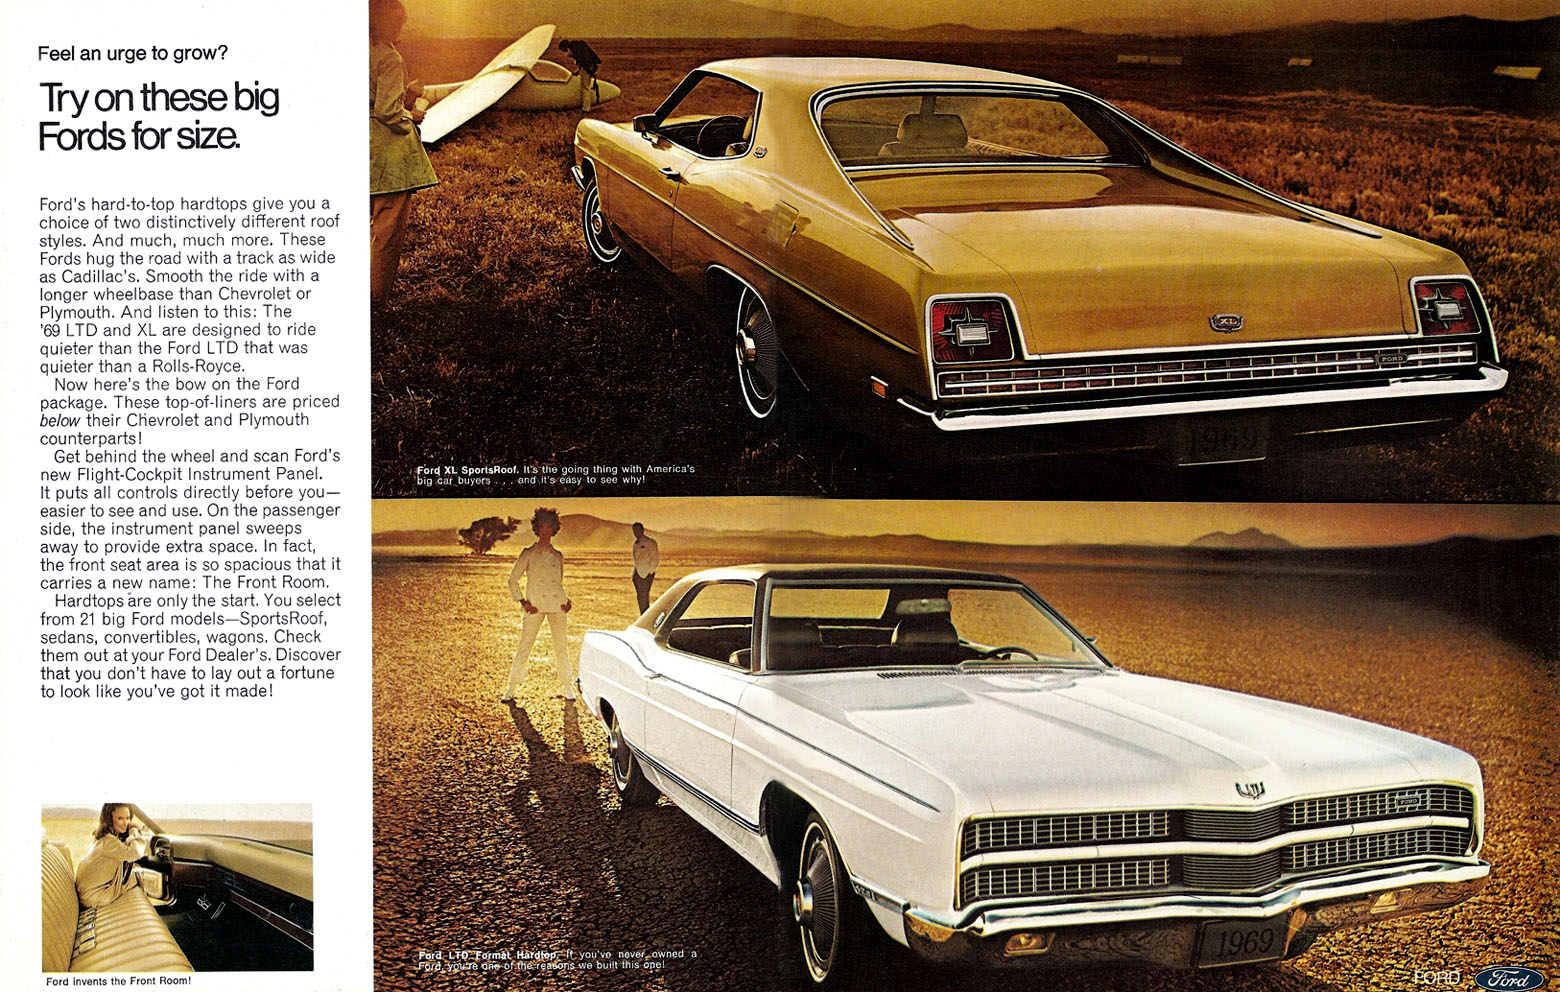 1969_Ford_Mailer-06-07